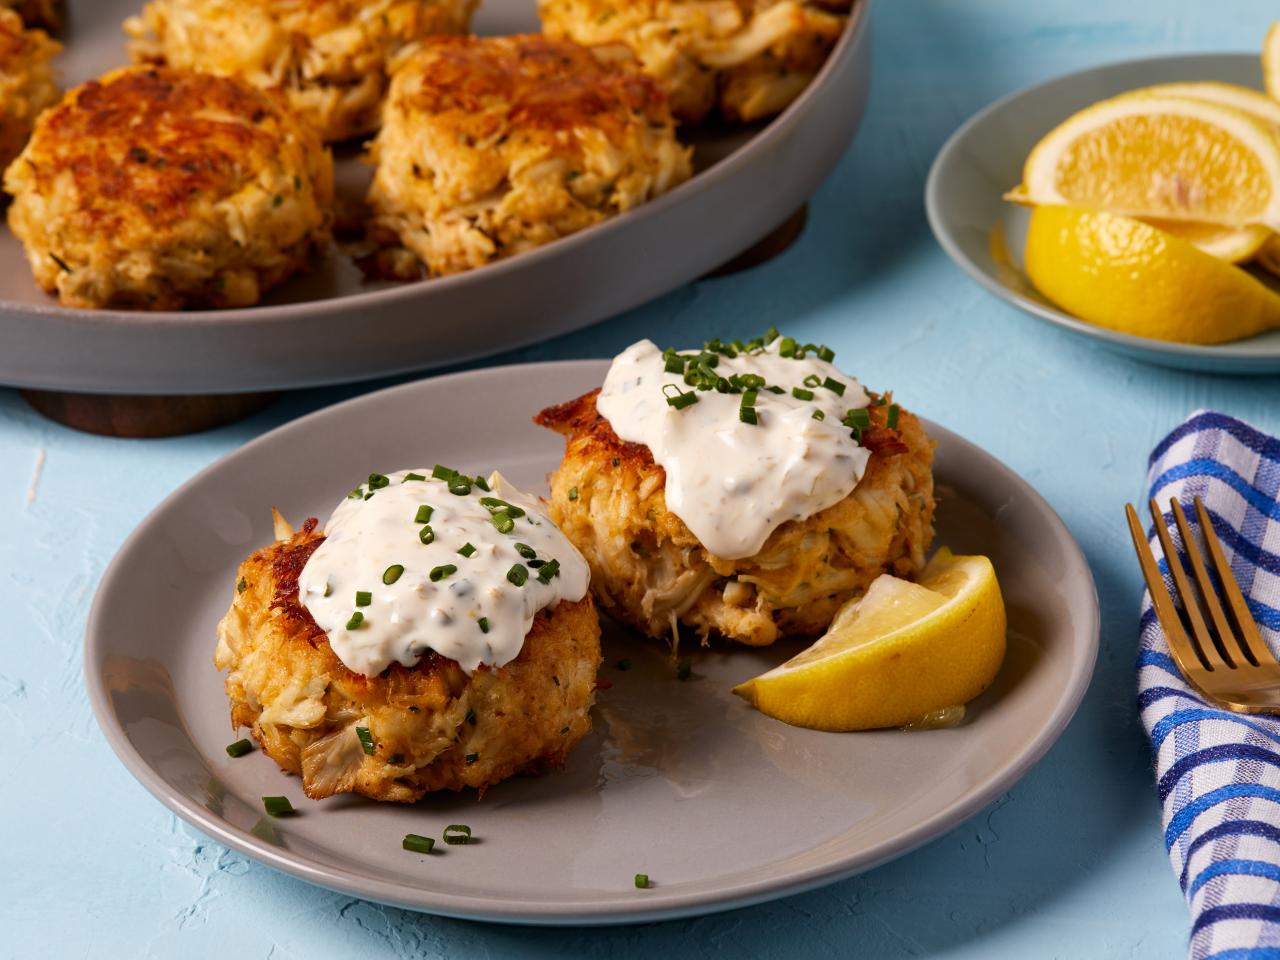 NatashasKitchen.com - This is the ultimate crab cake recipe and seasoned to  perfection. 👌 https://natashaskitchen.com/crab-cakes-recipe/ | Facebook